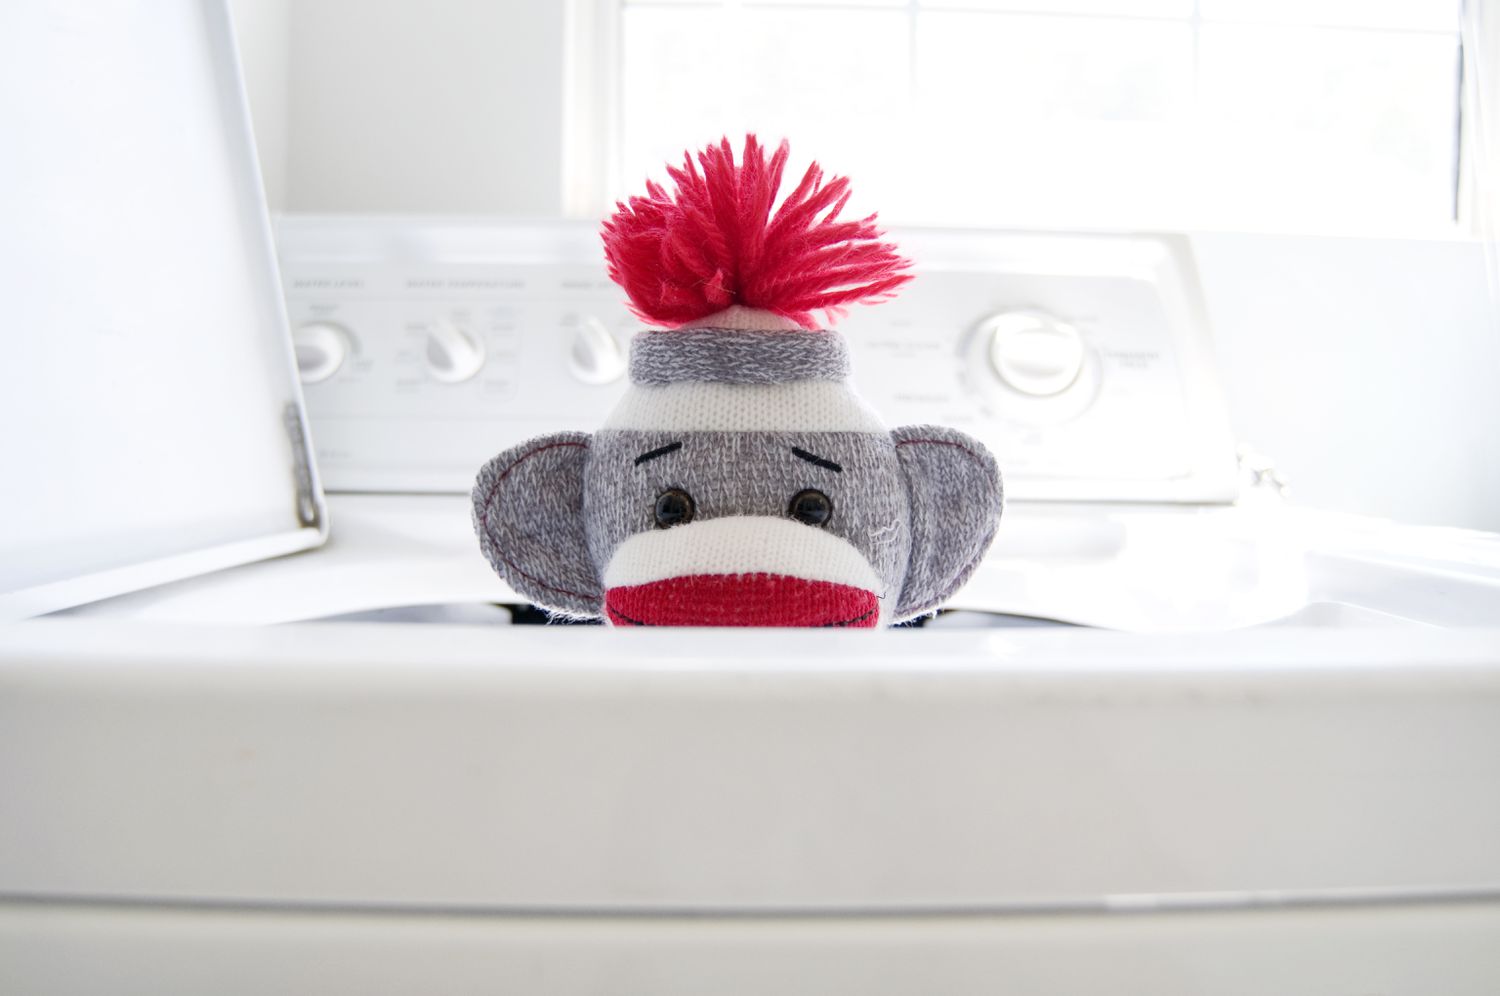 Sock toy in washer